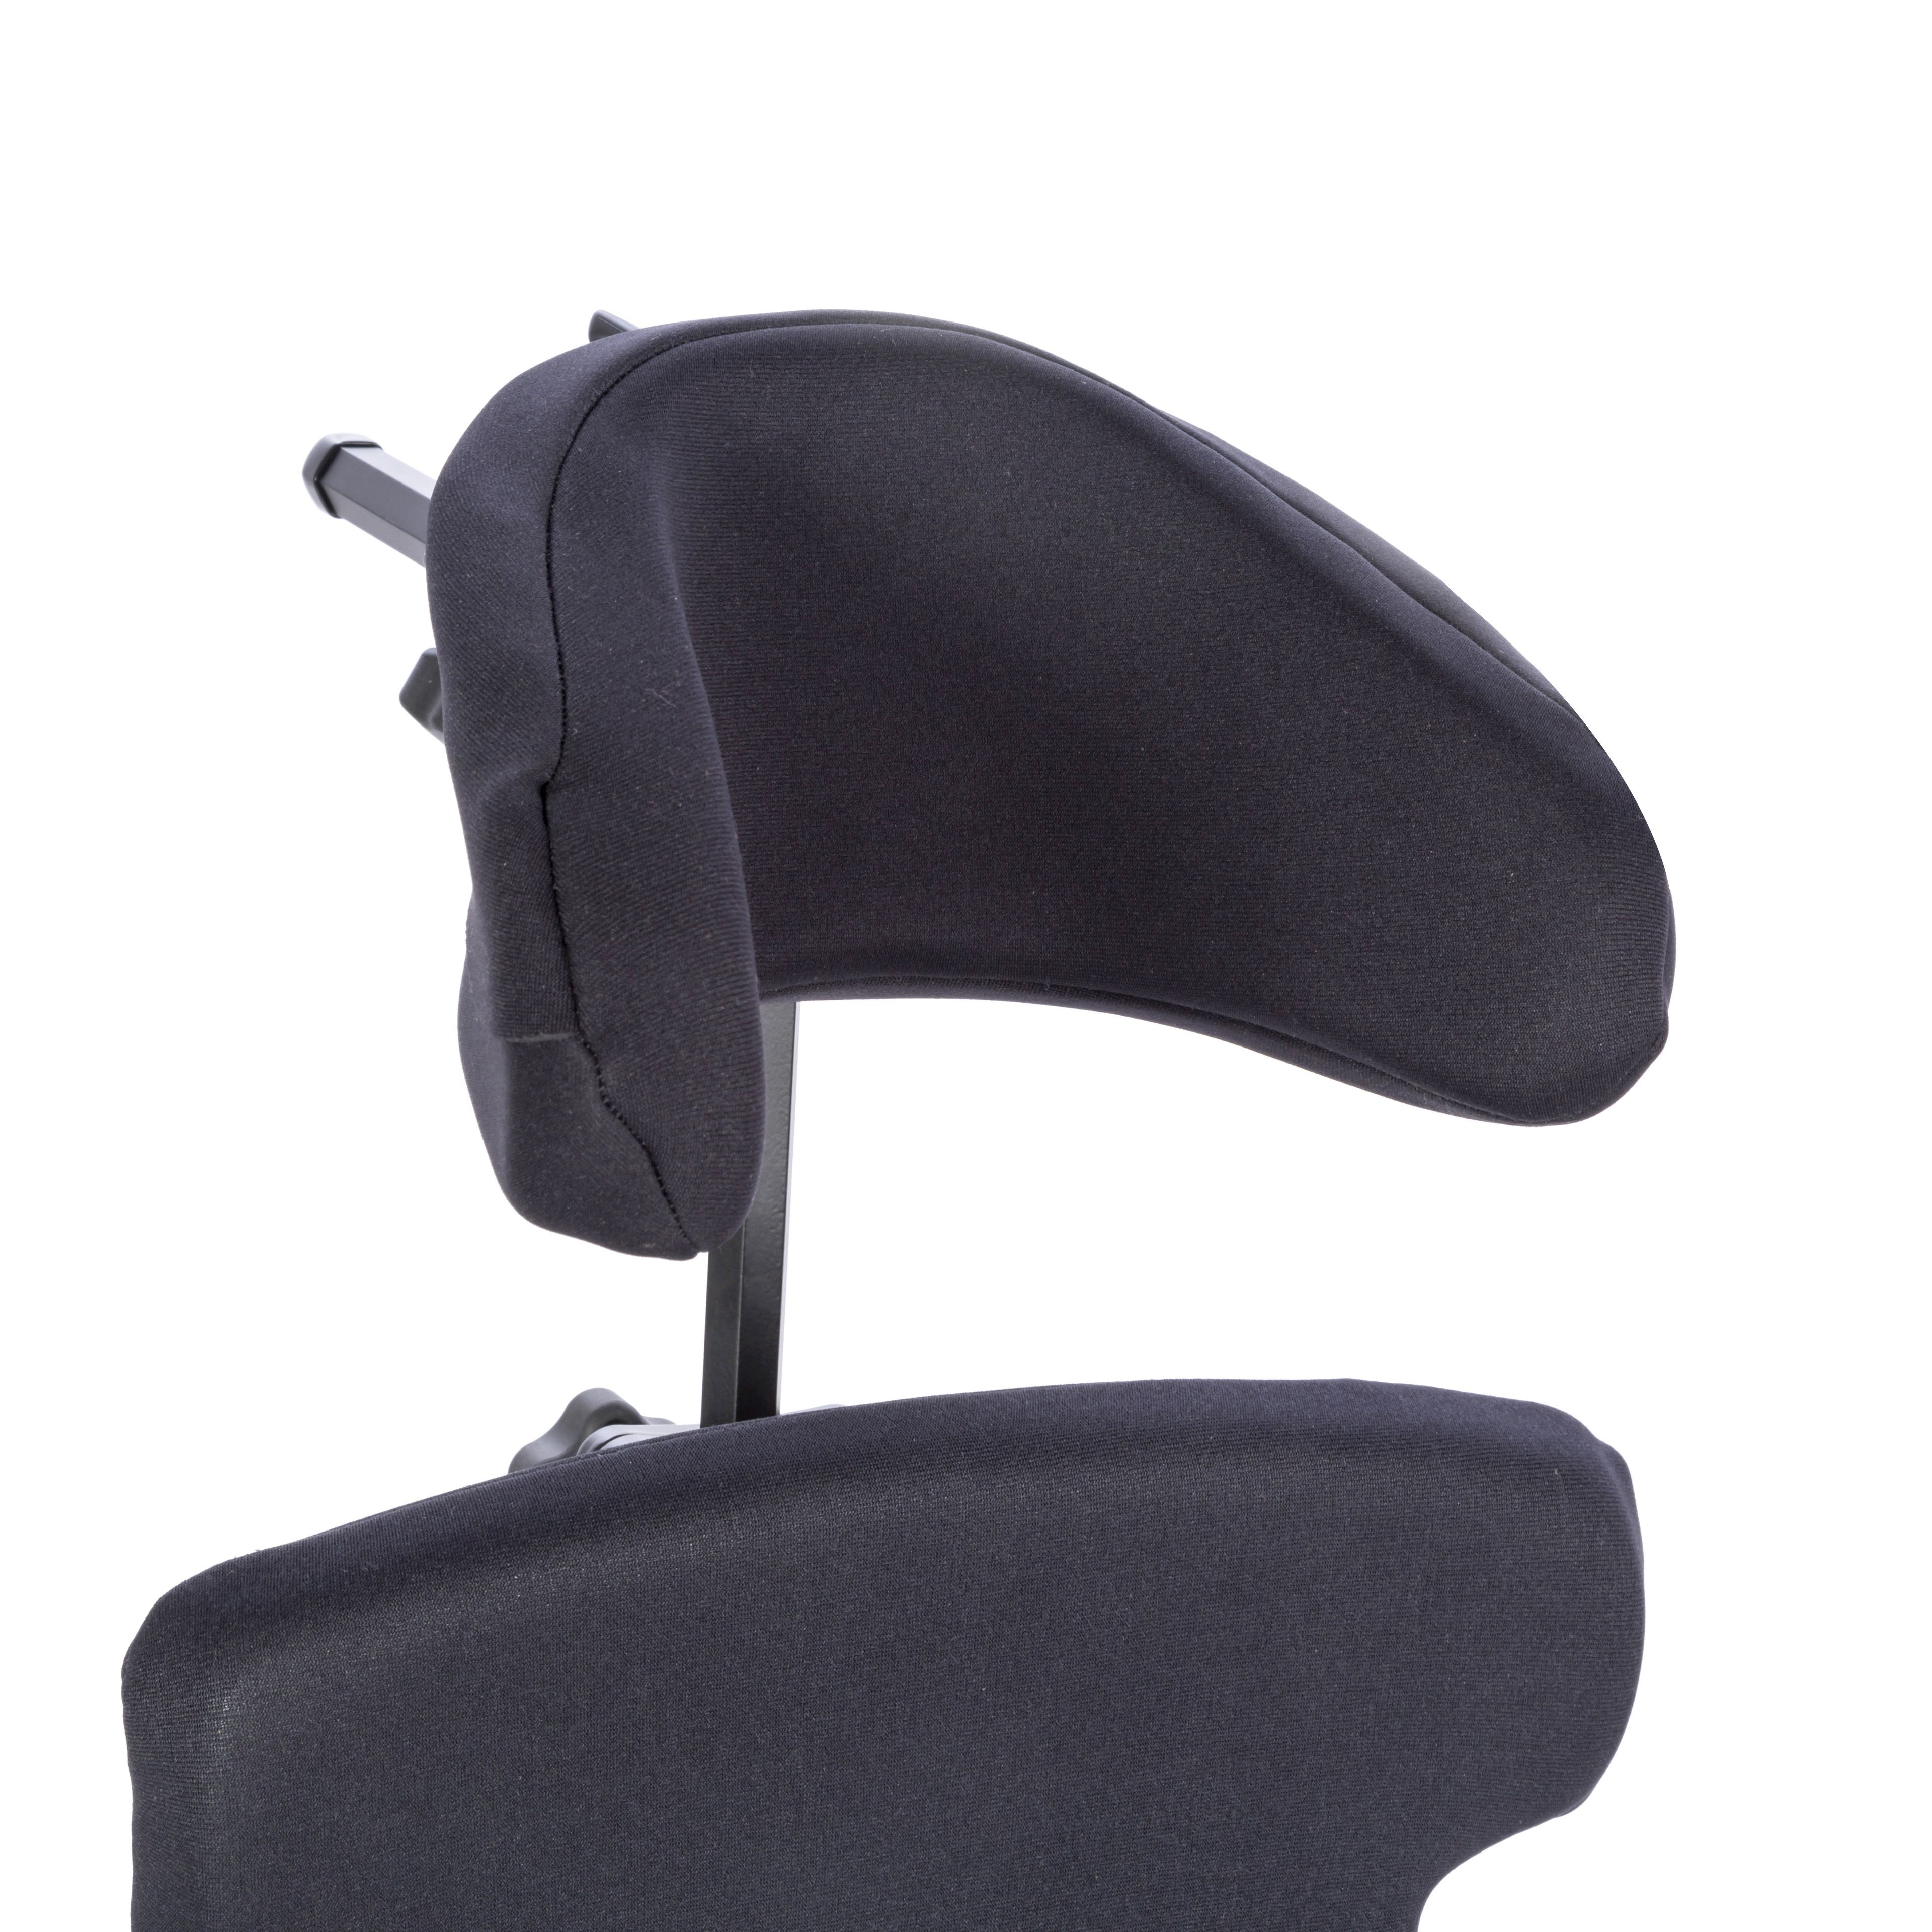 Head Support - Form to Fit 5"H x 10"W